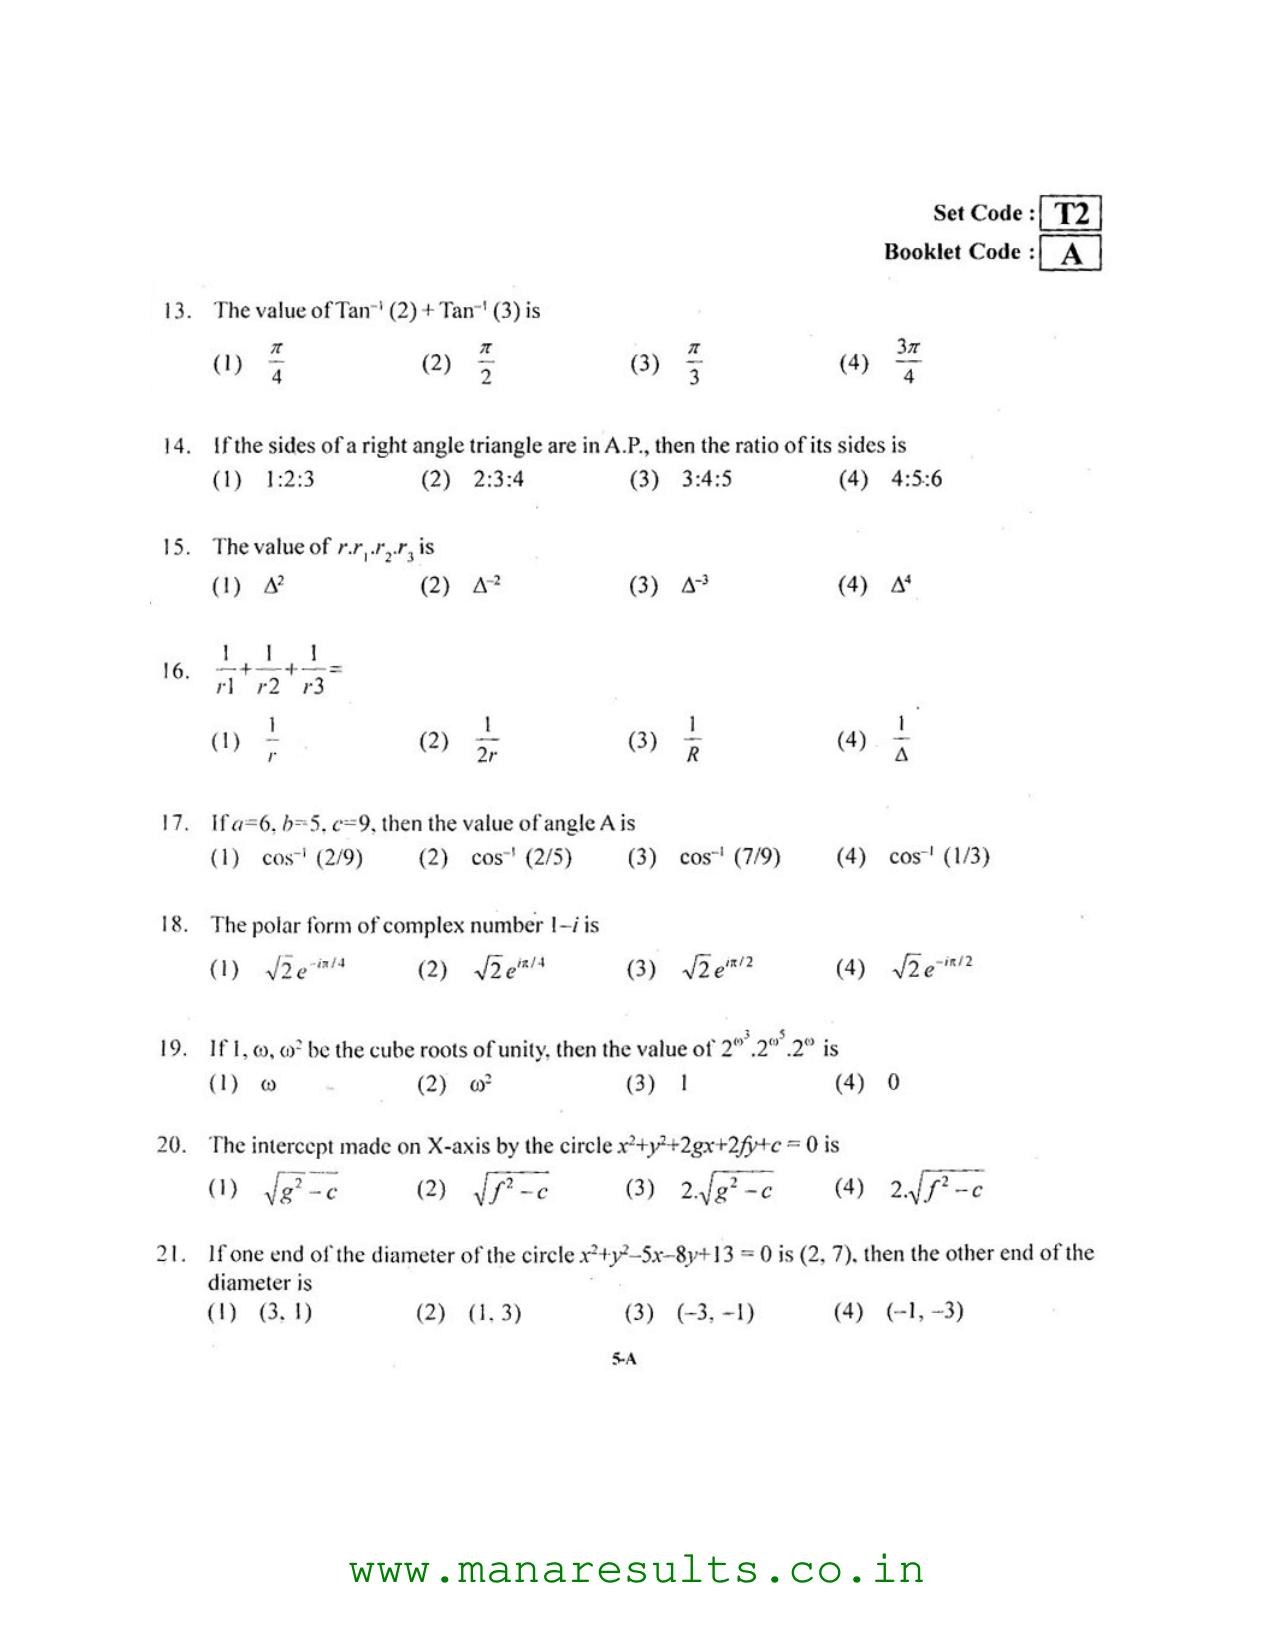 AP ECET 2016 Mining Engineering Old Previous Question Papers - Page 4